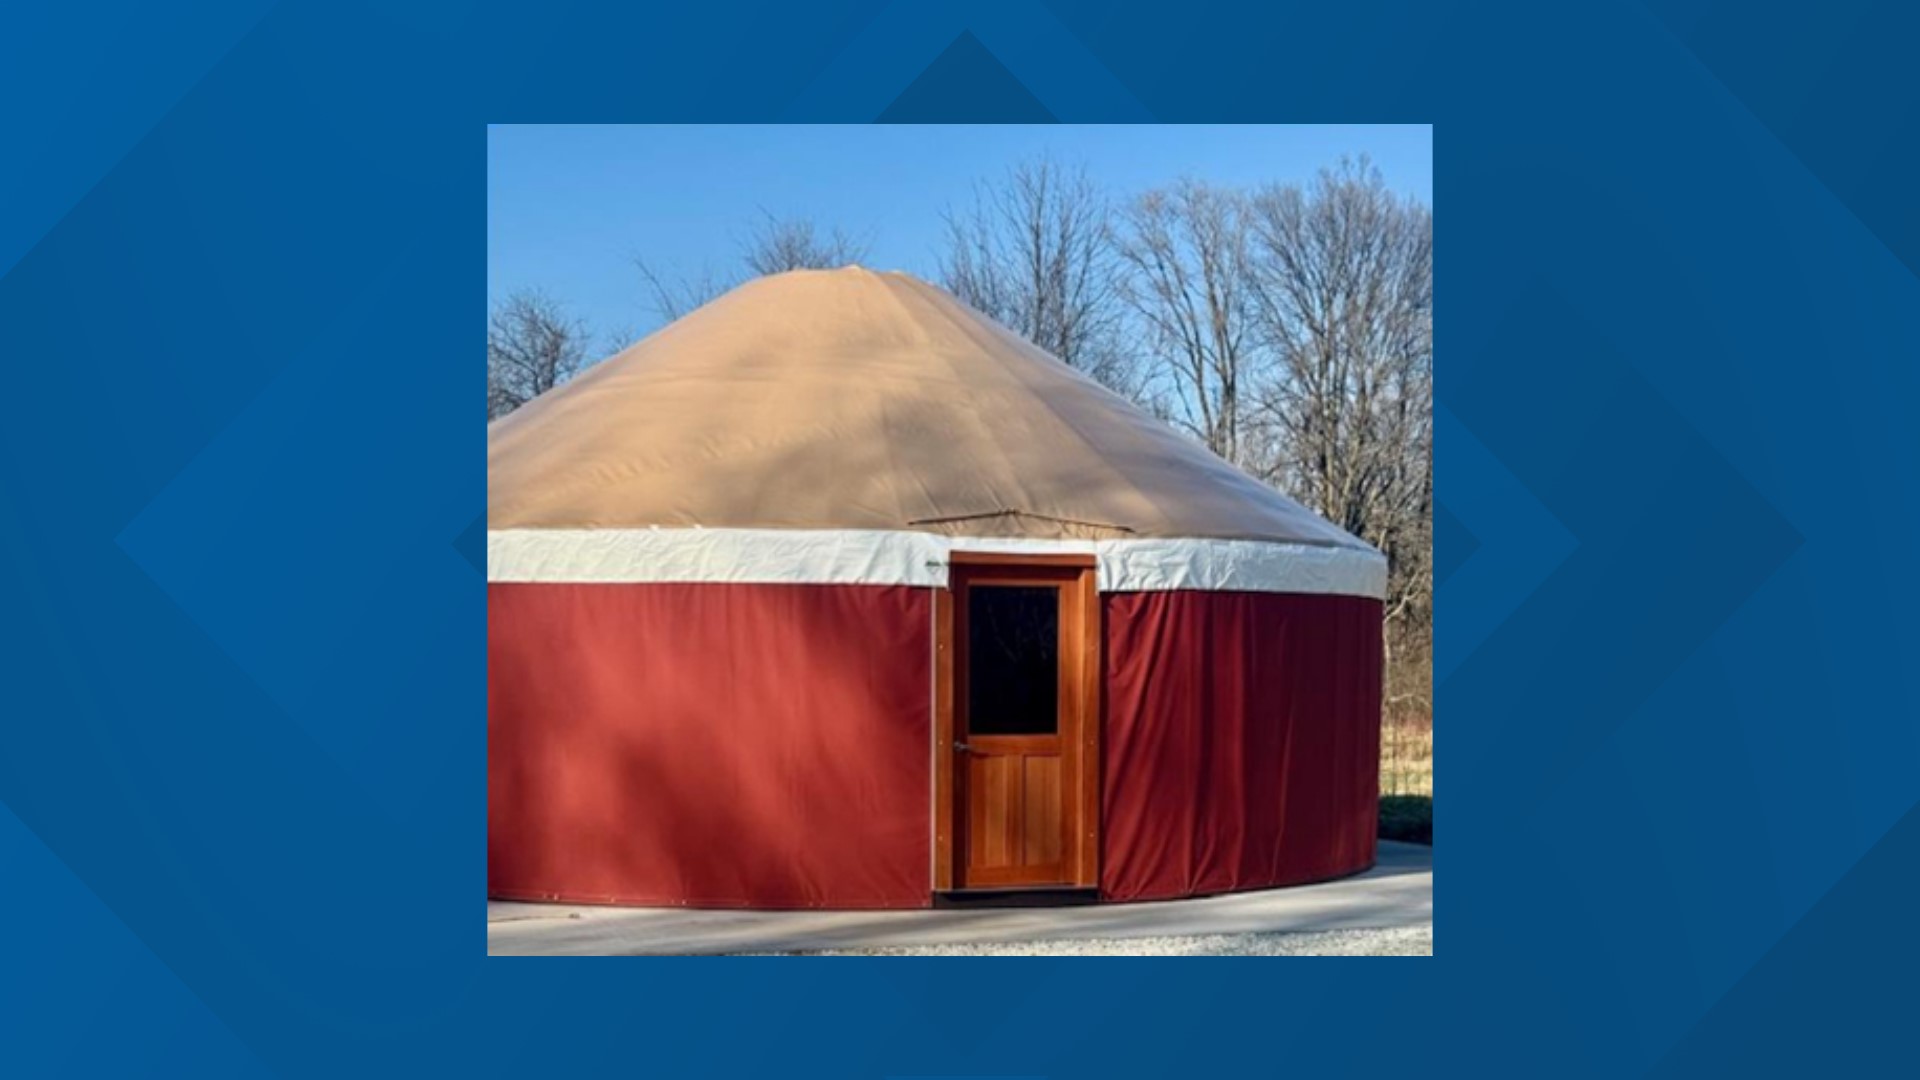 The newest classroom in Monmouth isn't like any you've probably seen. Monmouth College's new yurt adds a new learning space for area elementary students.